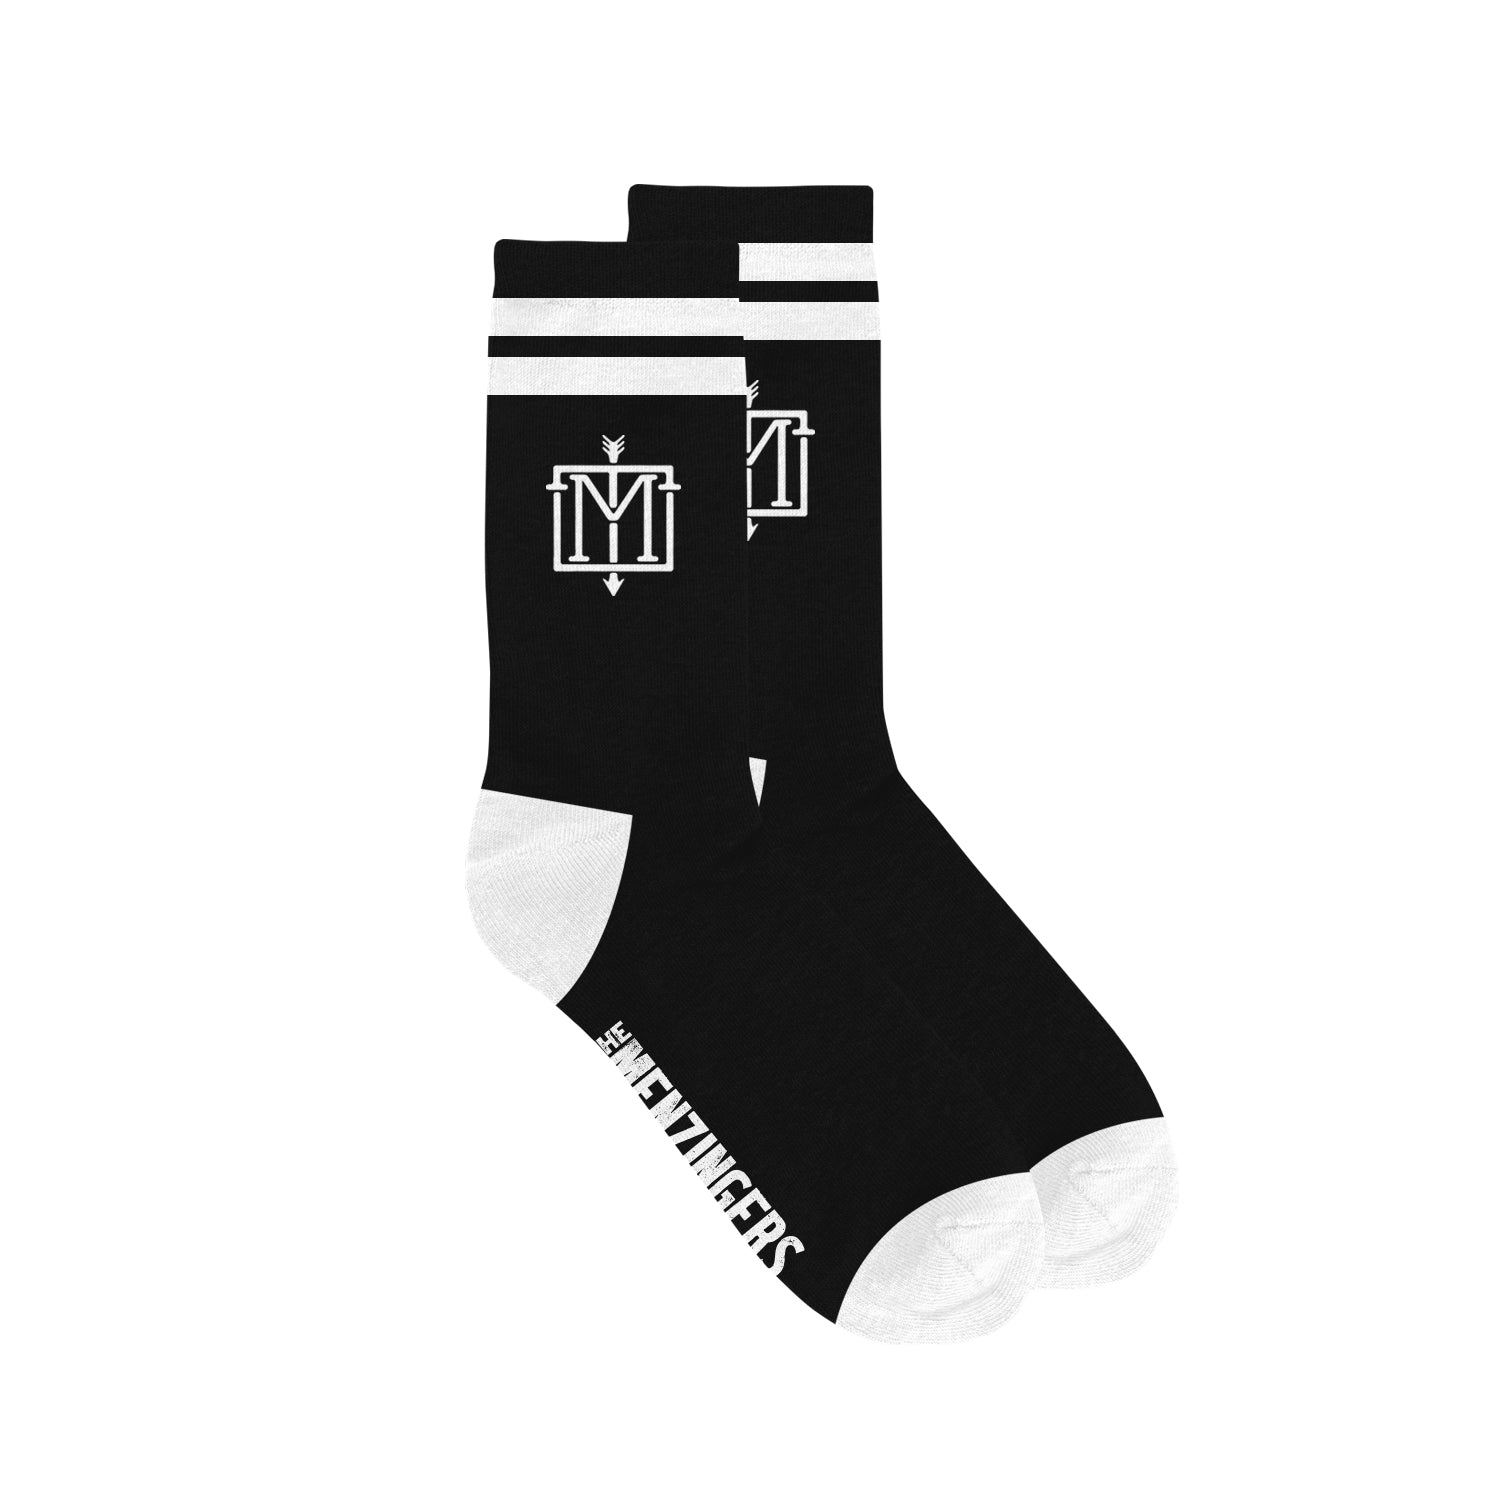 image of two socks on white background. socks are black with two white stripes at the top and white toes and heals. there is a white emblem with the letter M and an arrow down the center on the part of the sock that is above the ankle and it says the menzingers in white on the side bottom of the socks.